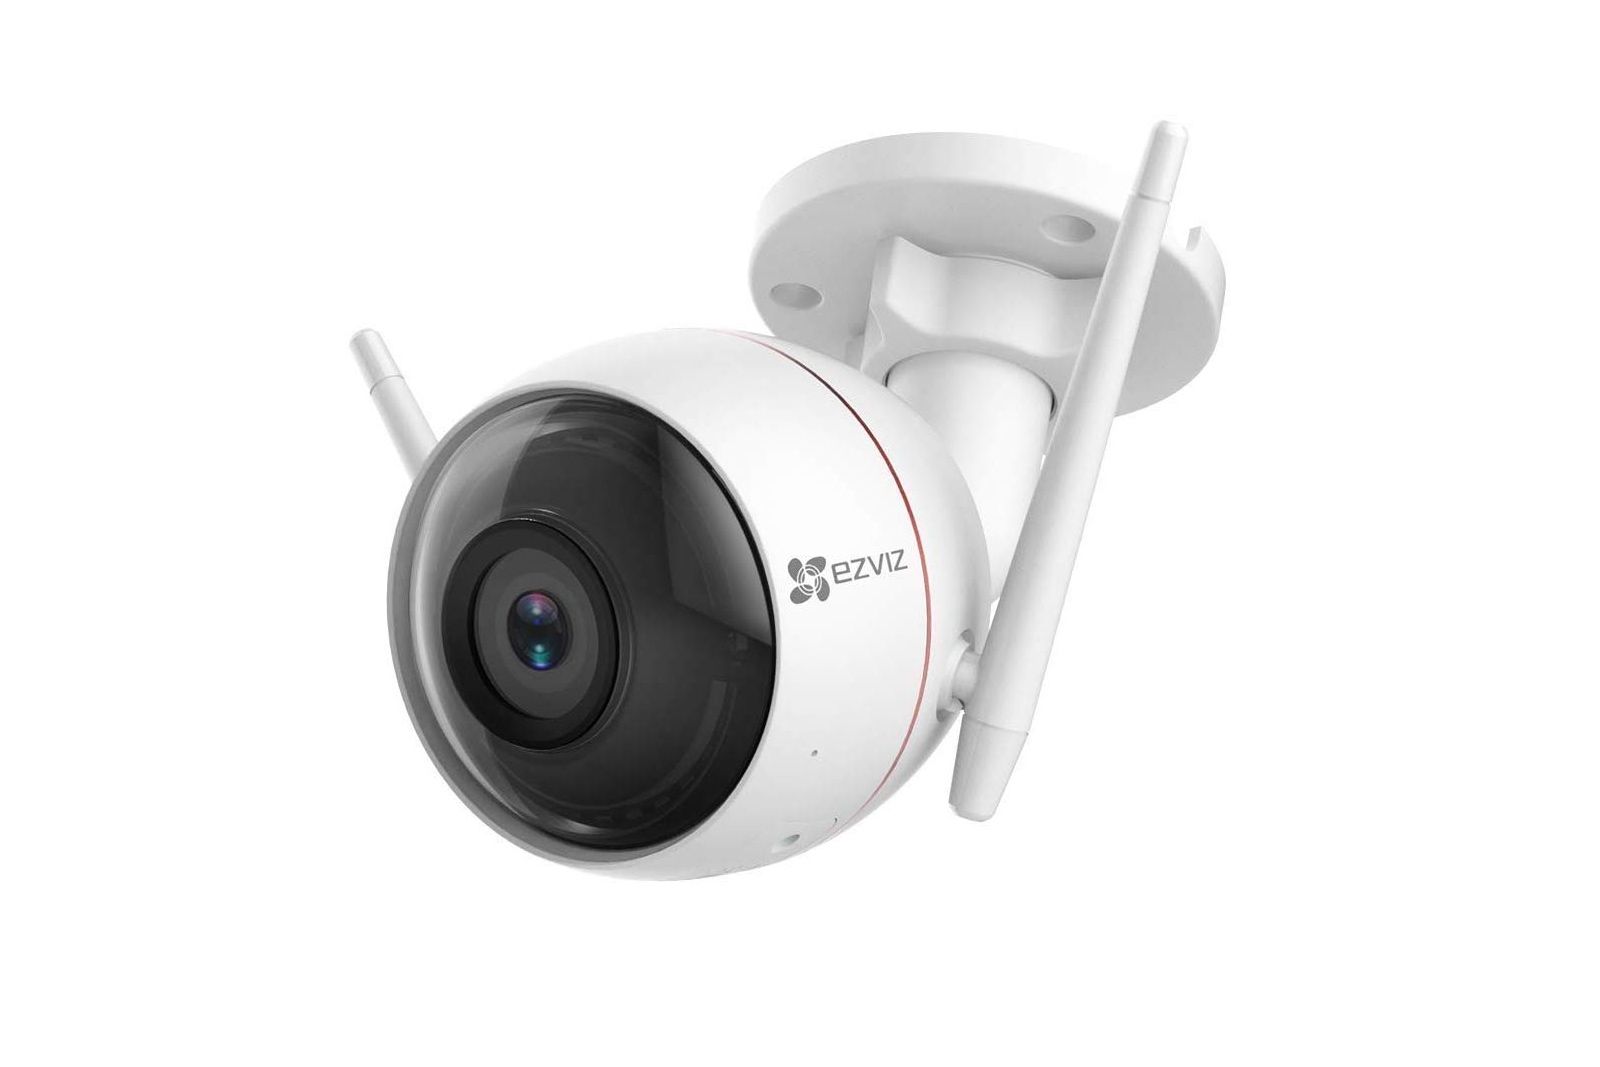 The Best Deals On Home Security Cameras From Ezviz image 2